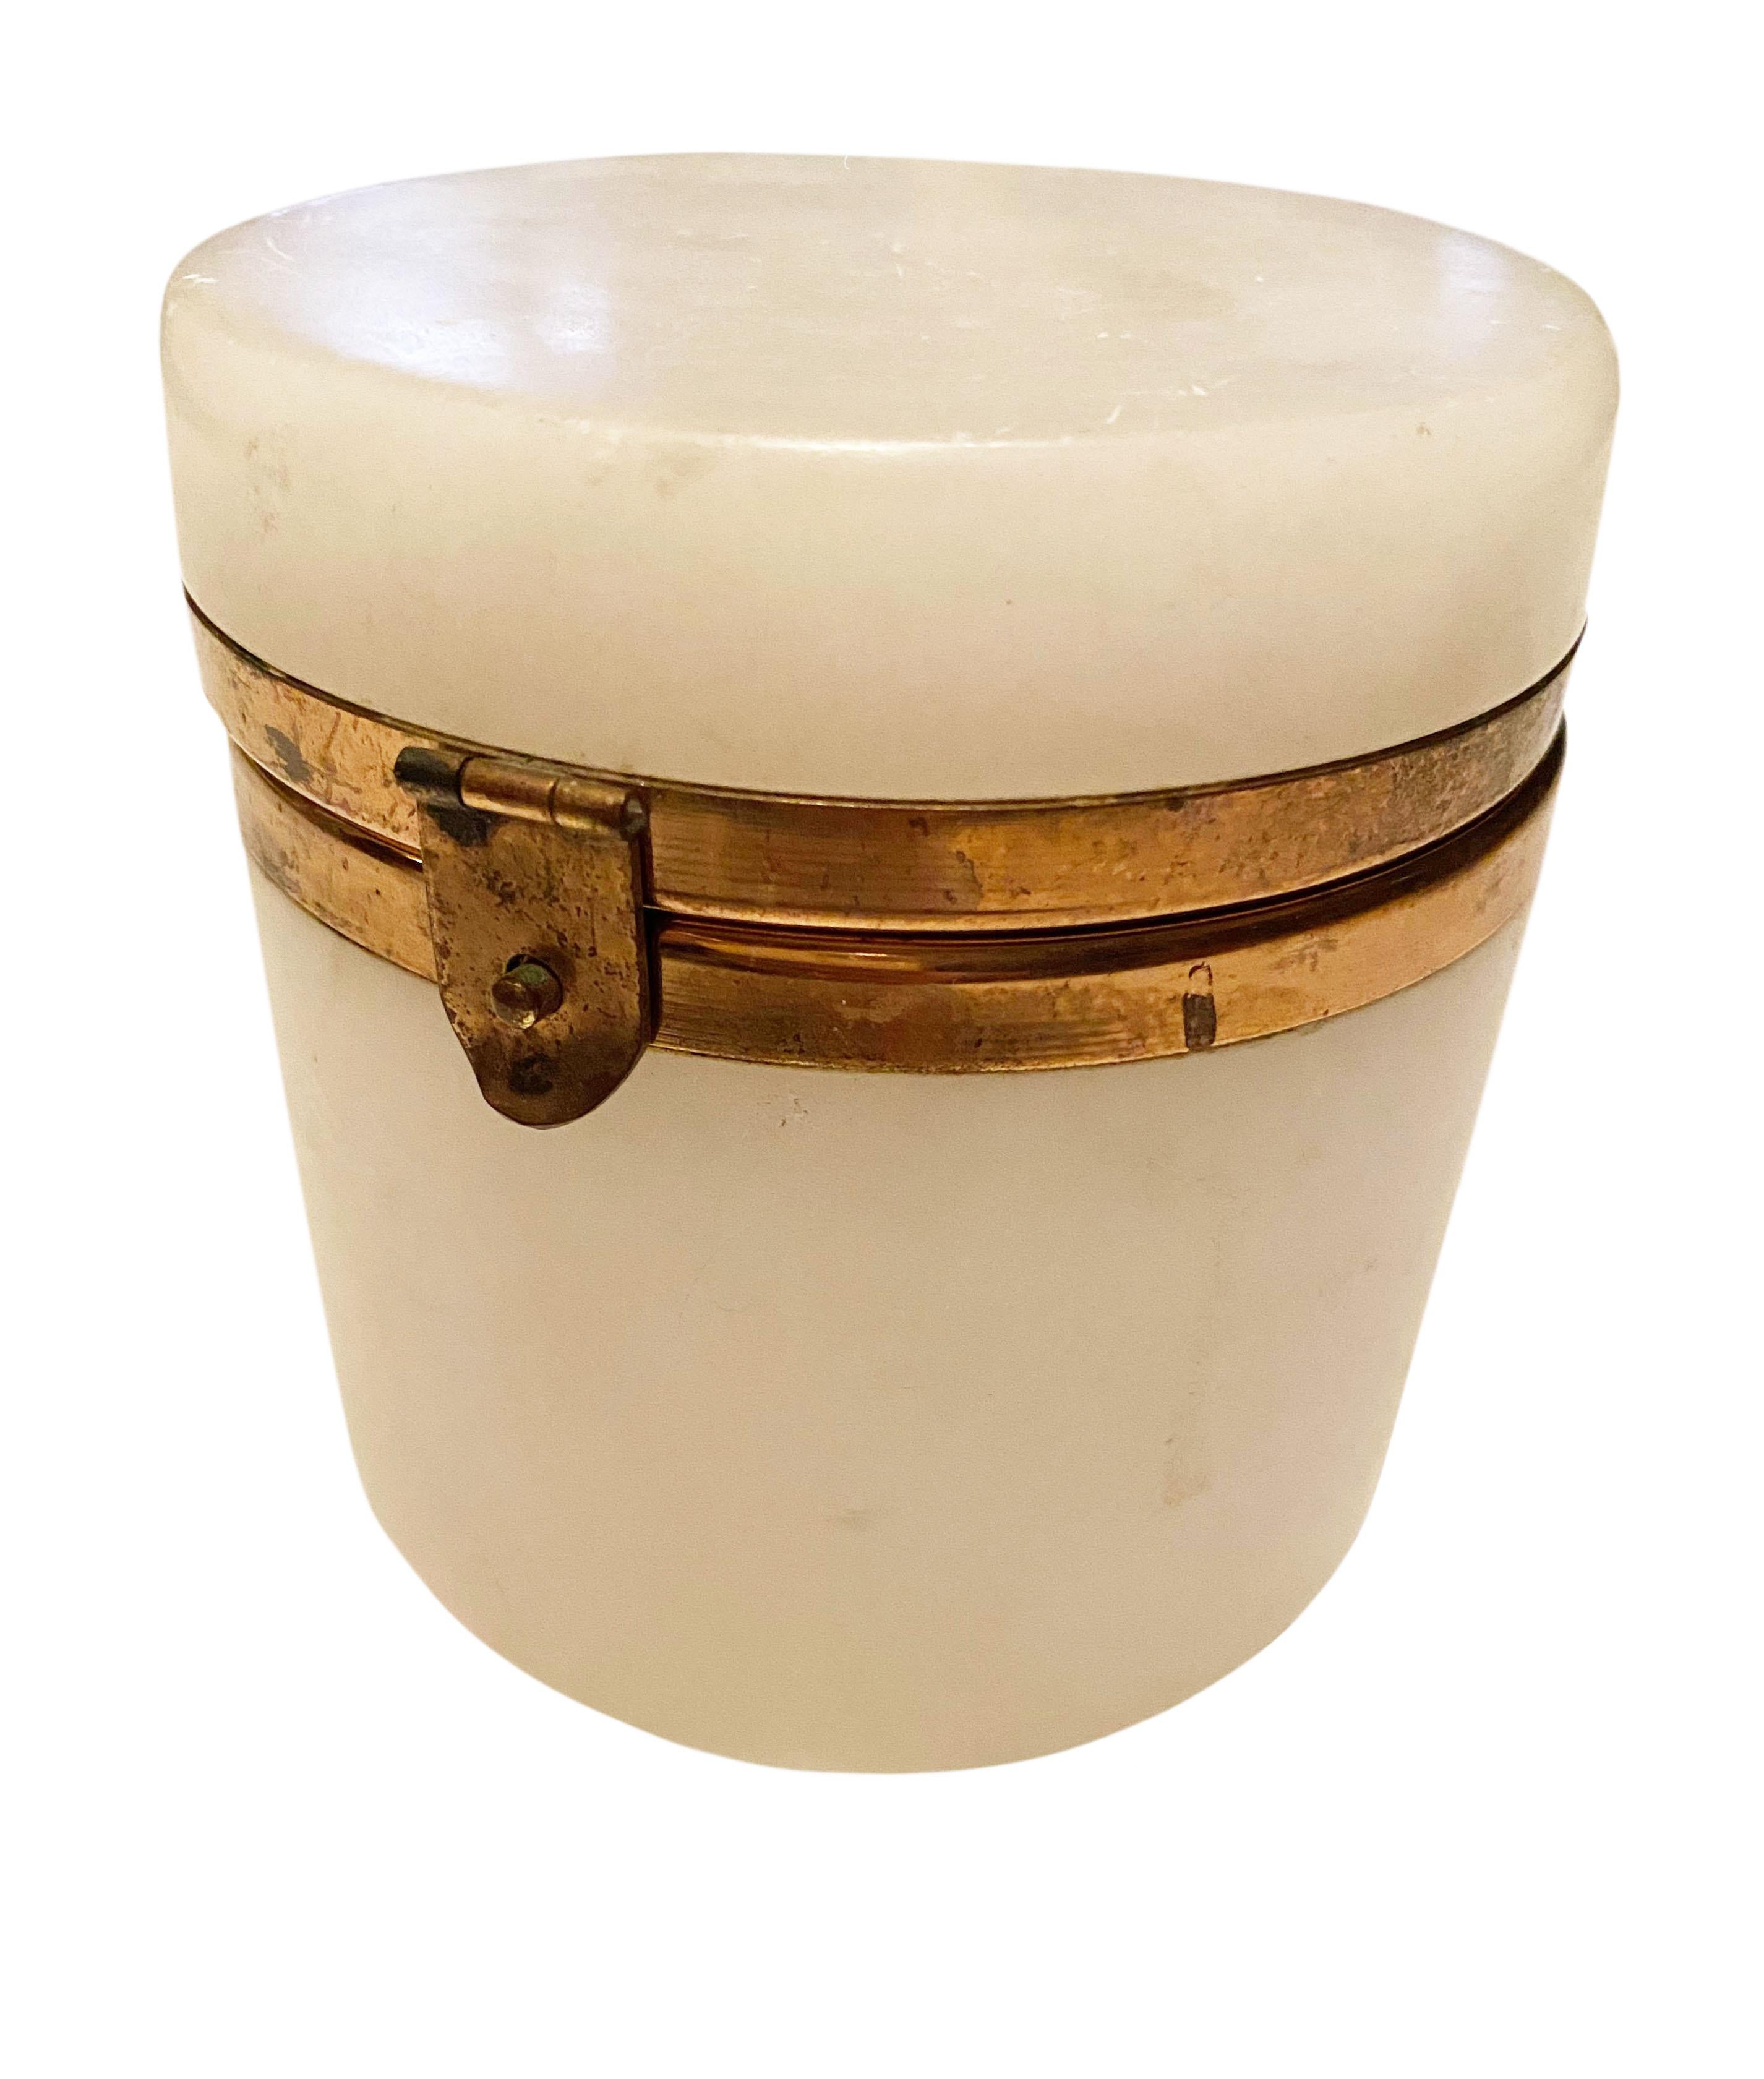 An Italian round mid century white alabaster box. With brass rim and clasp.